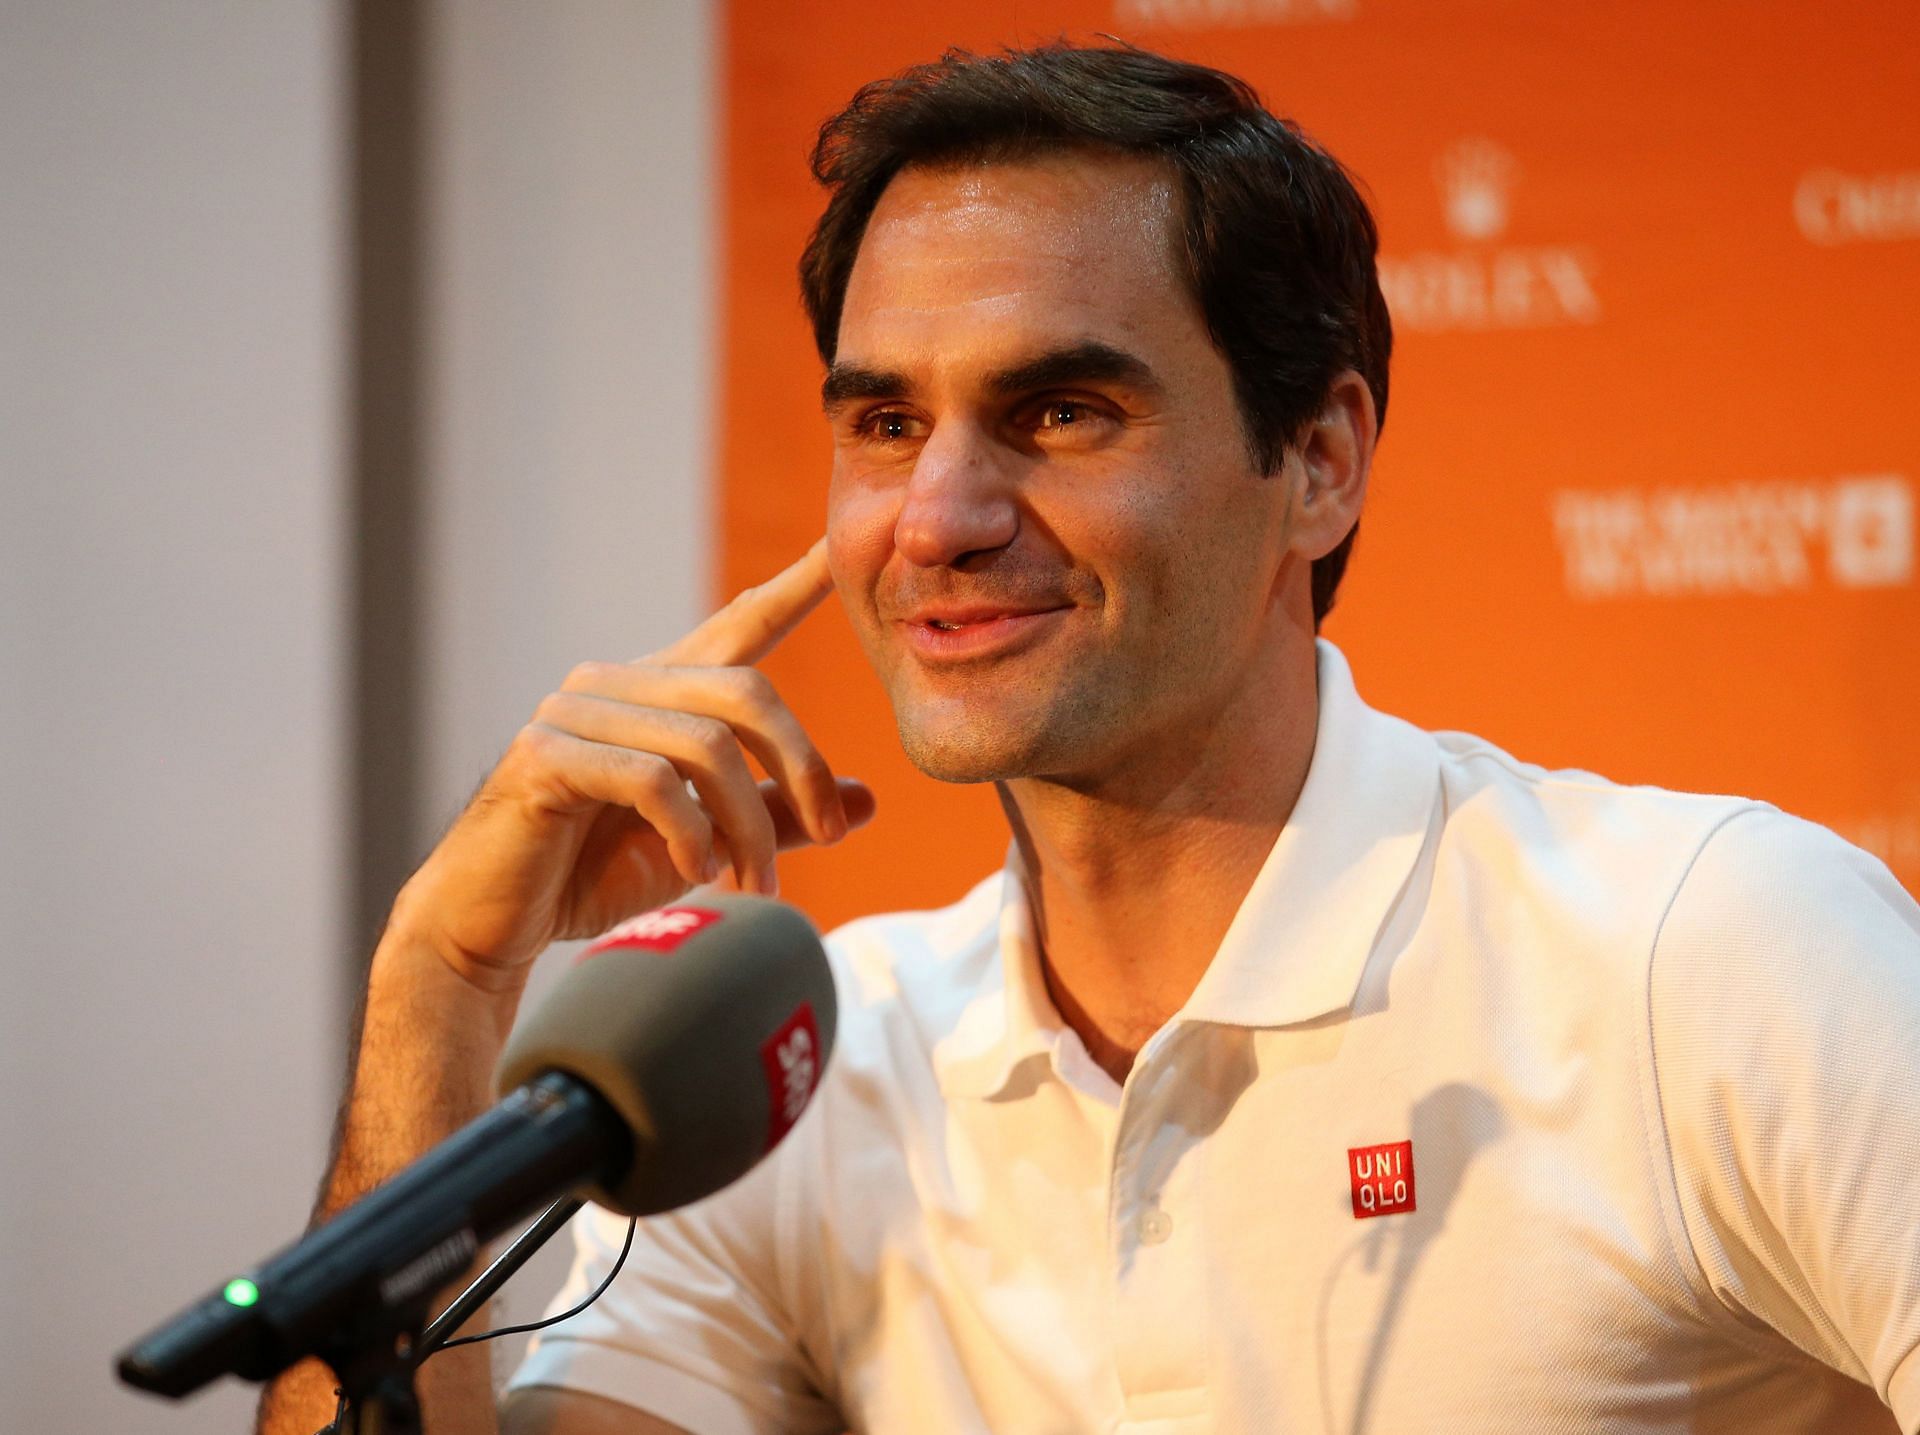 3 bold quotes by Roger Federer